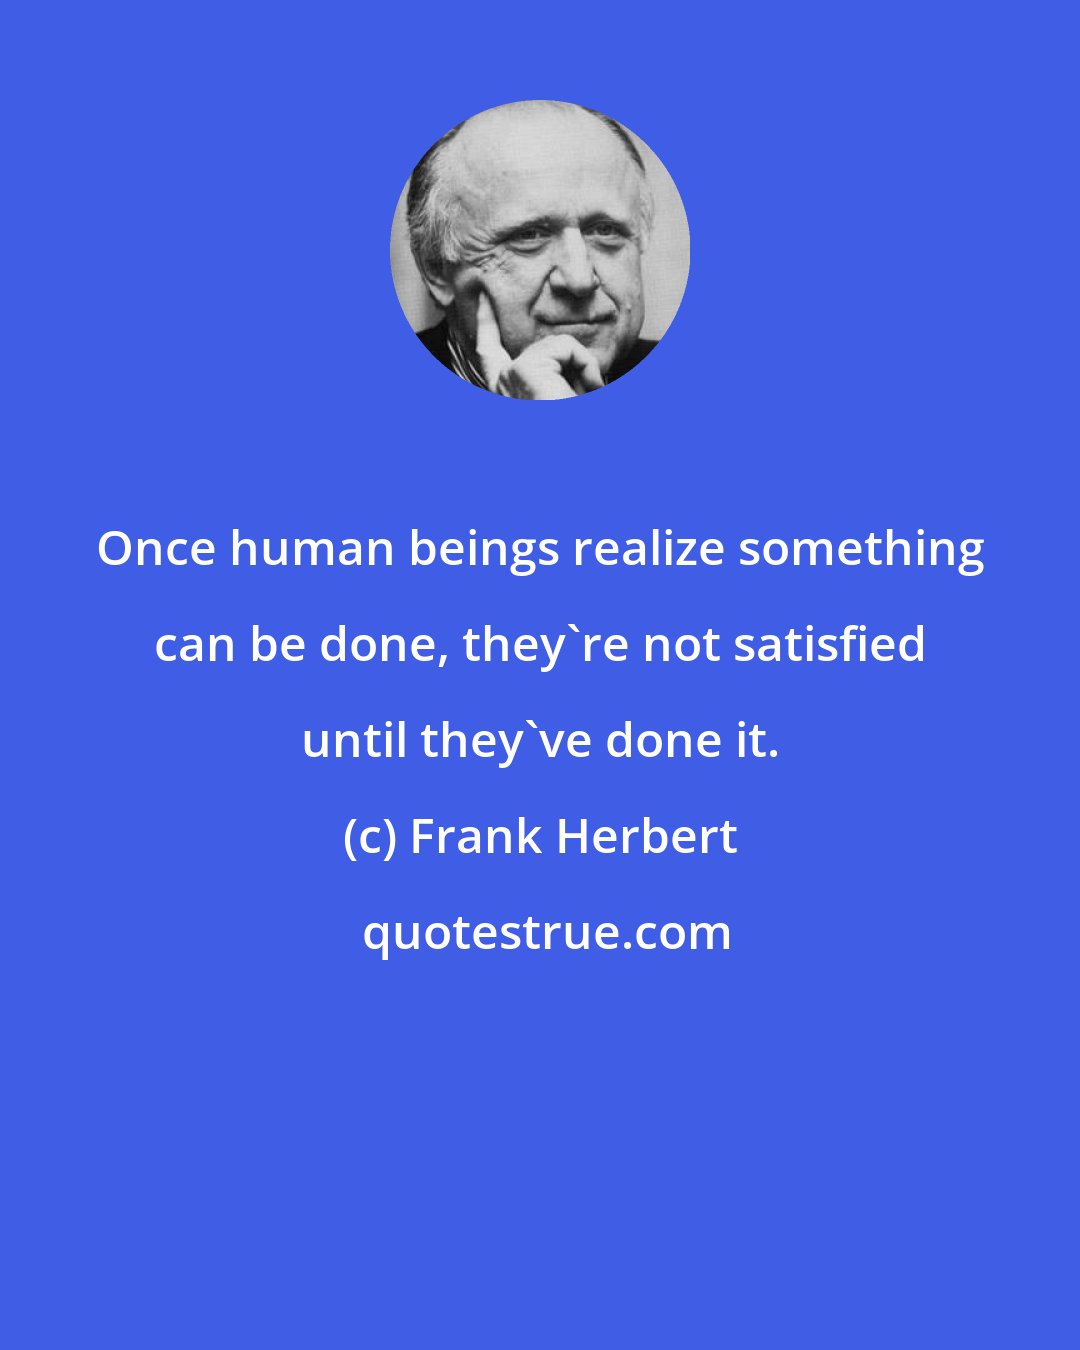 Frank Herbert: Once human beings realize something can be done, they're not satisfied until they've done it.